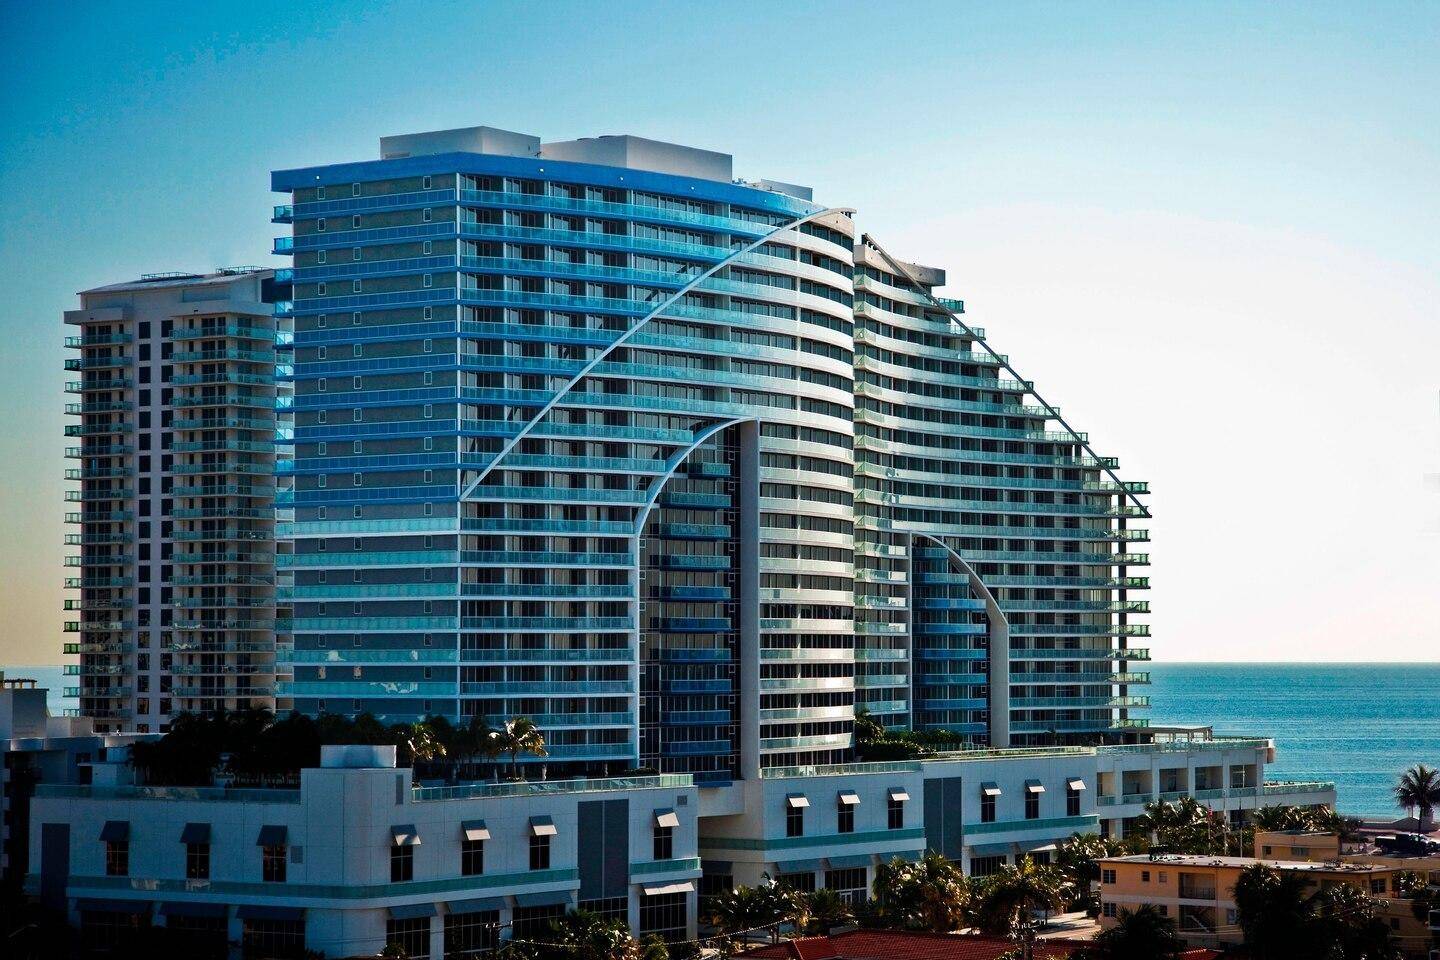 The PERFECT vacation home, The W Hotel Condo Hotel OR long term, short term daily rental property all in one.